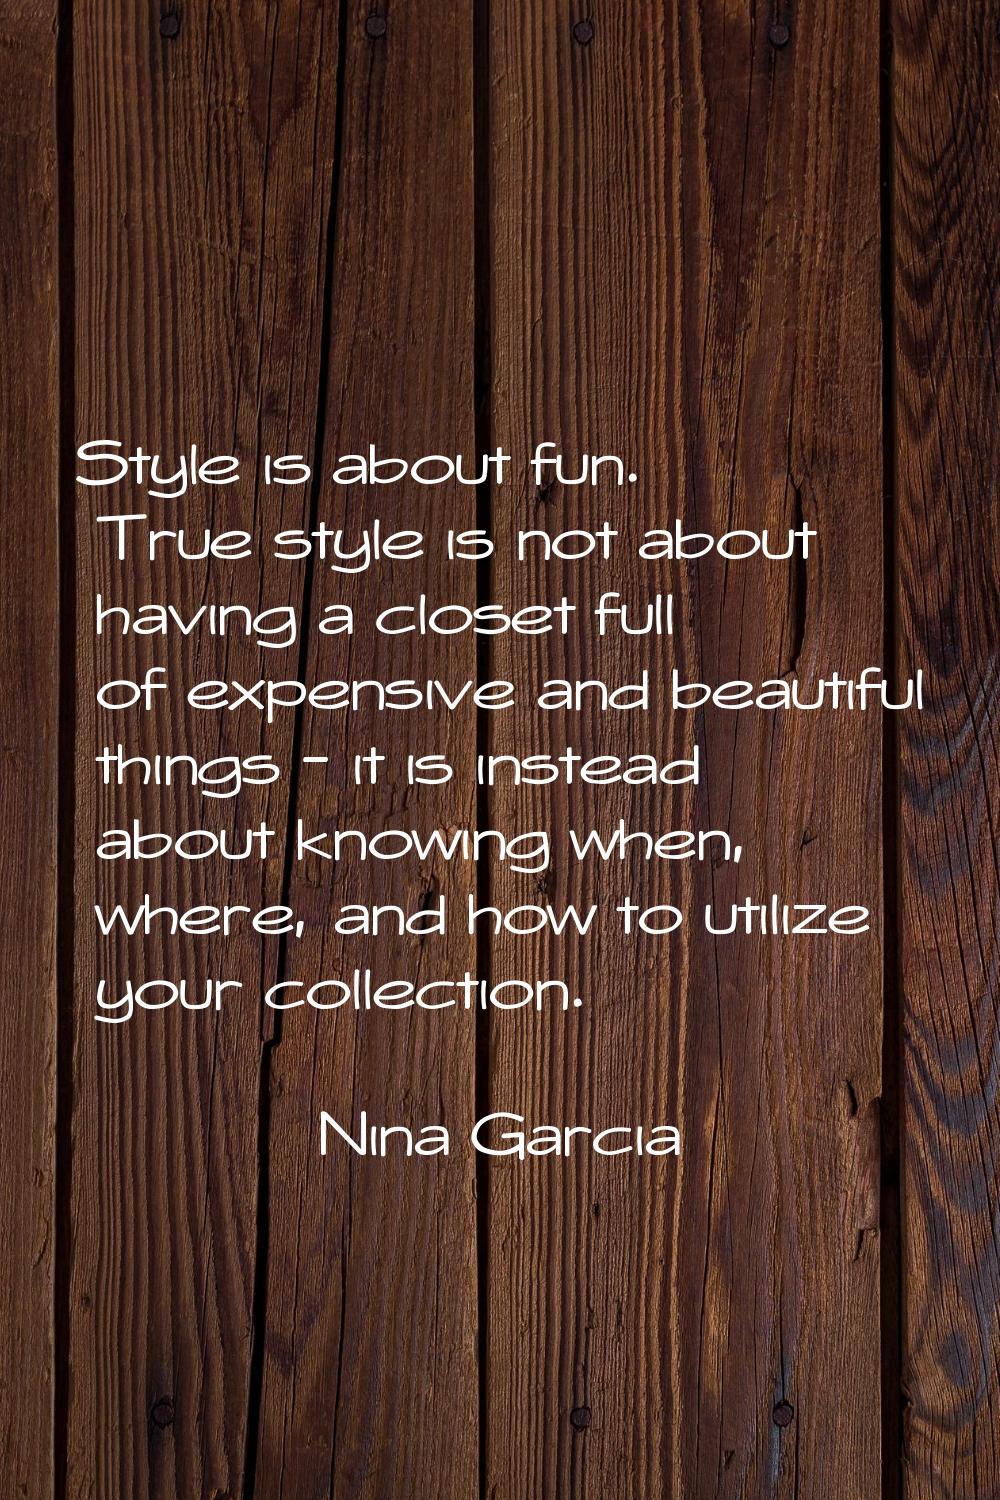 Style is about fun. True style is not about having a closet full of expensive and beautiful things 